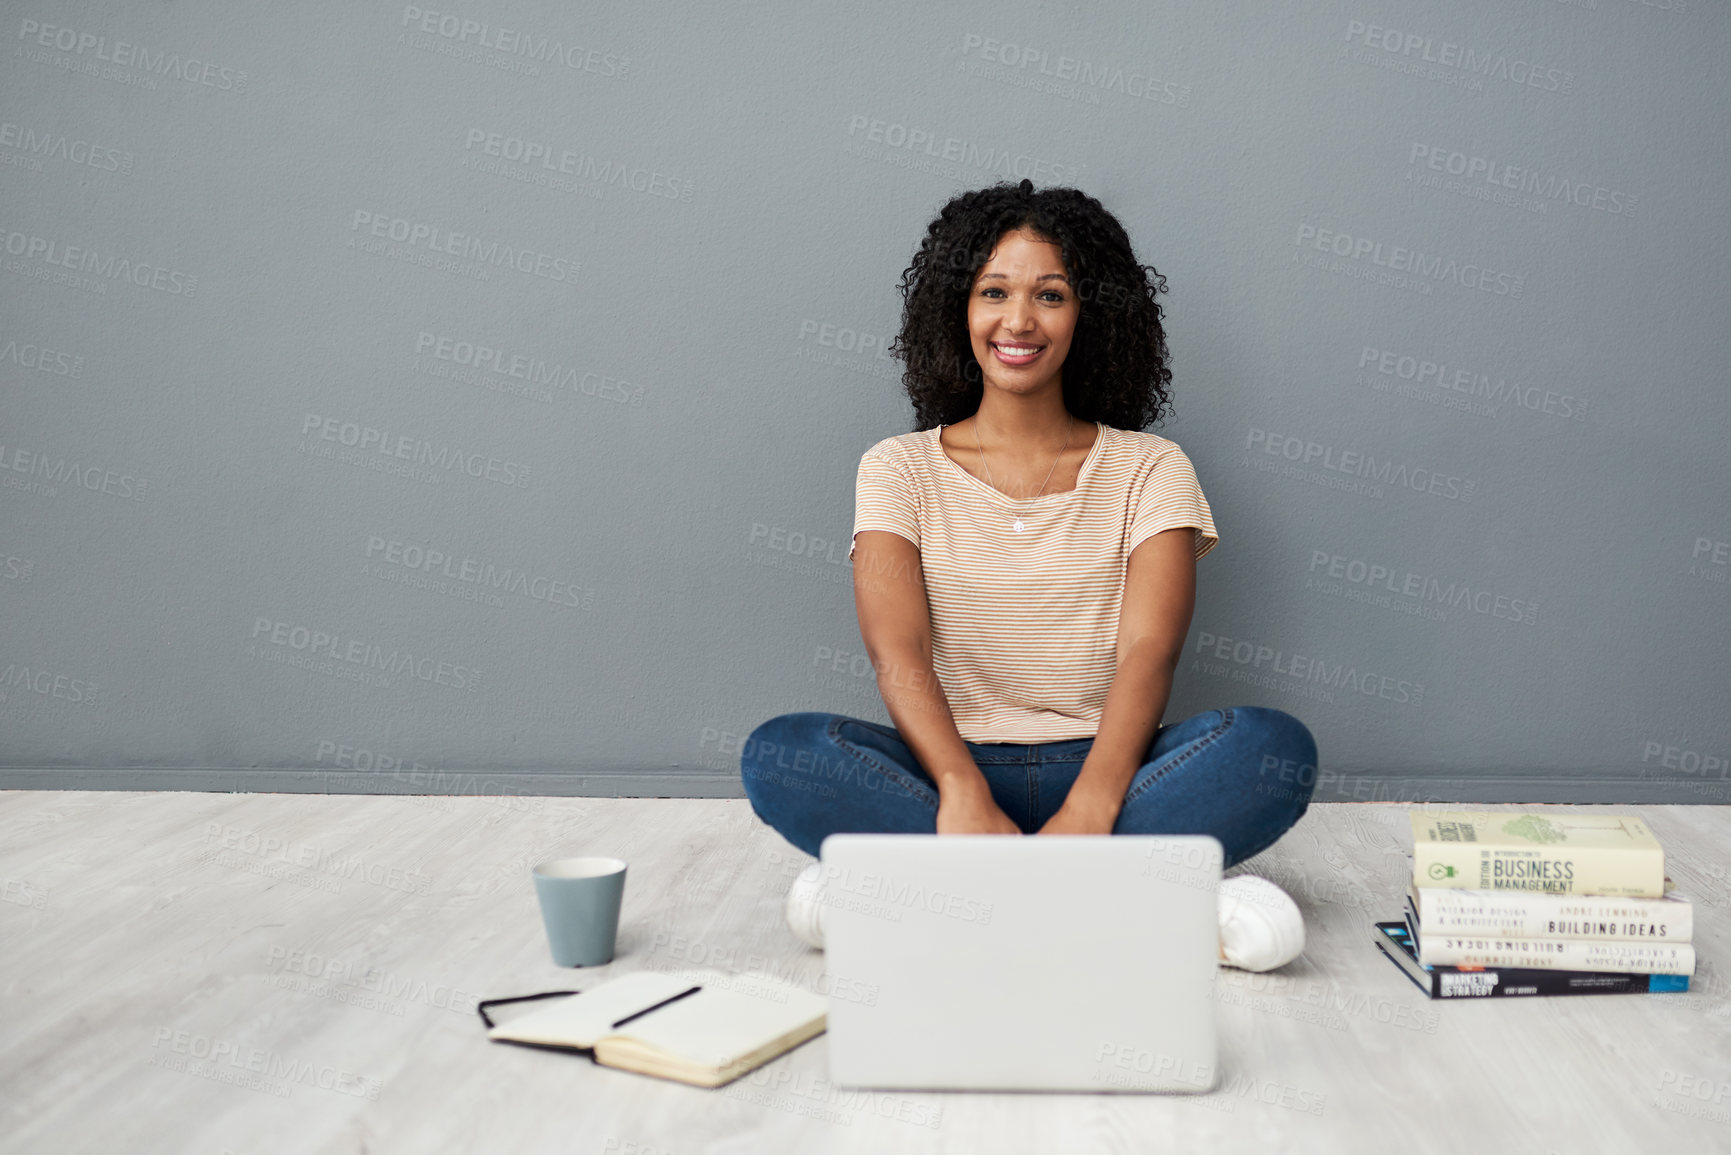 Buy stock photo Studio shot of a young woman using a laptop while completing her studies against a gray background